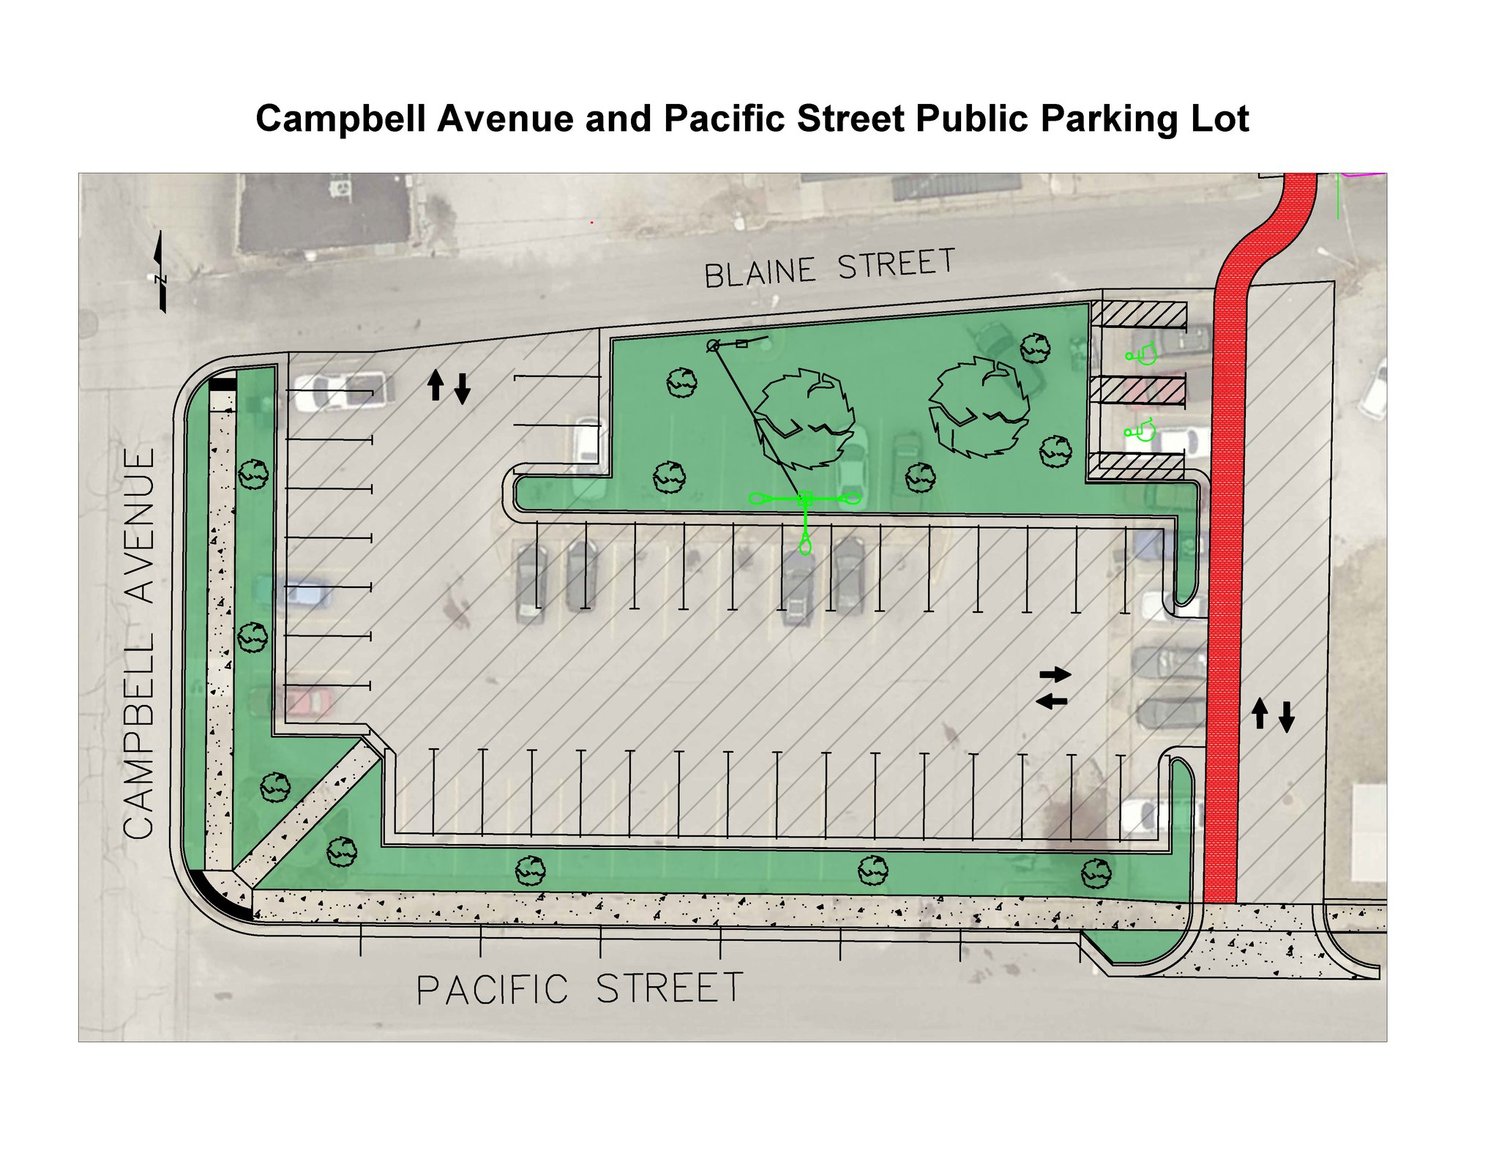 Parking lot improvements at Campbell Avenue and Pacific Street are scheduled to start next week.